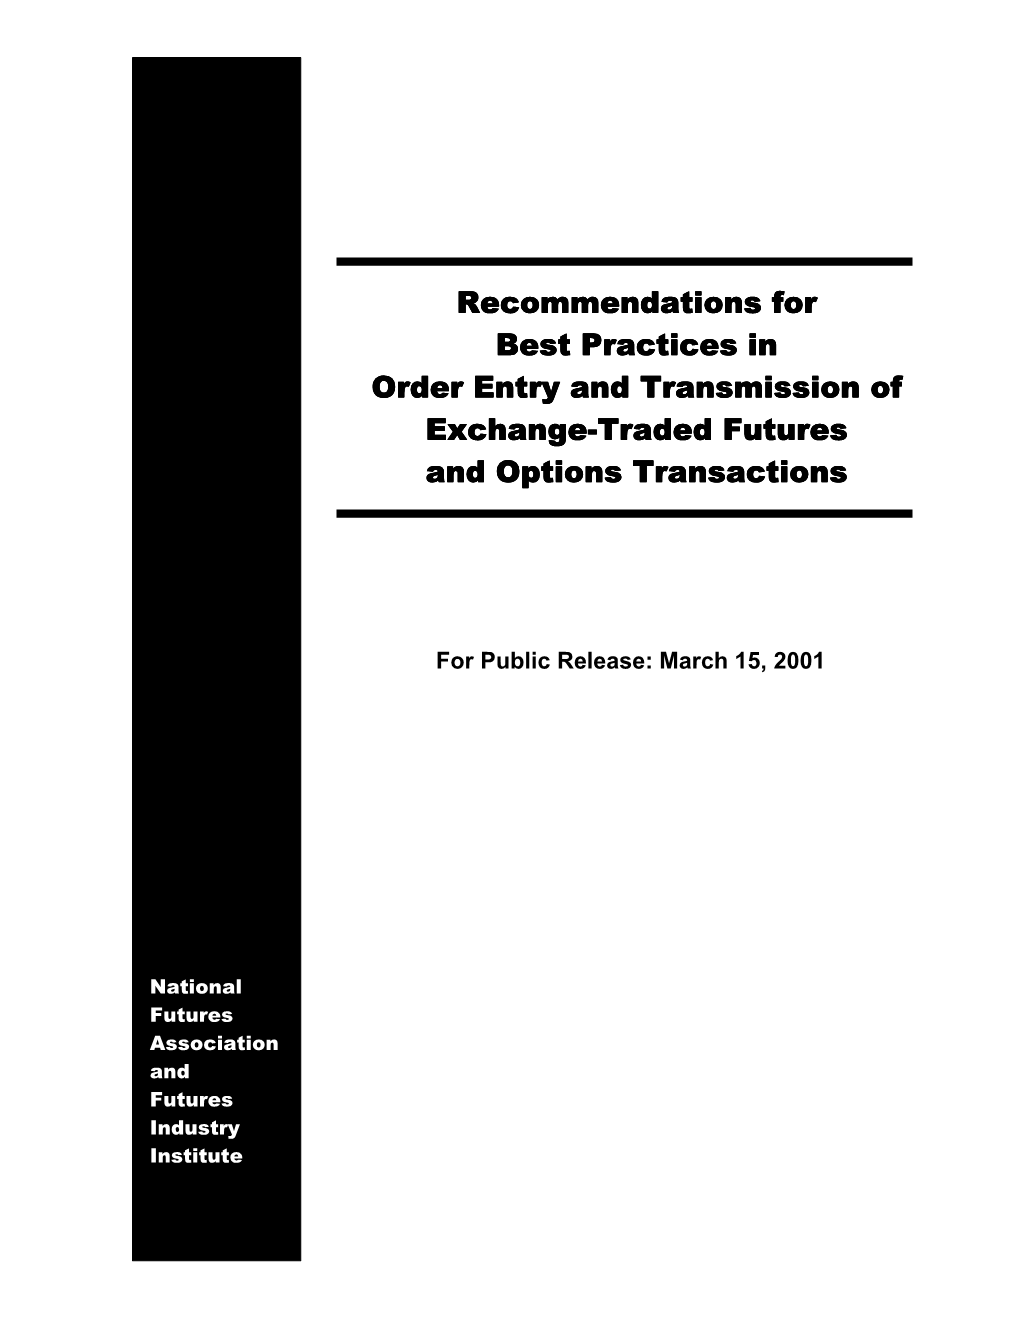 Recommendations for Best Practices in Order Entry and Transmission of Exchange-Traded Futures and Options Transactions